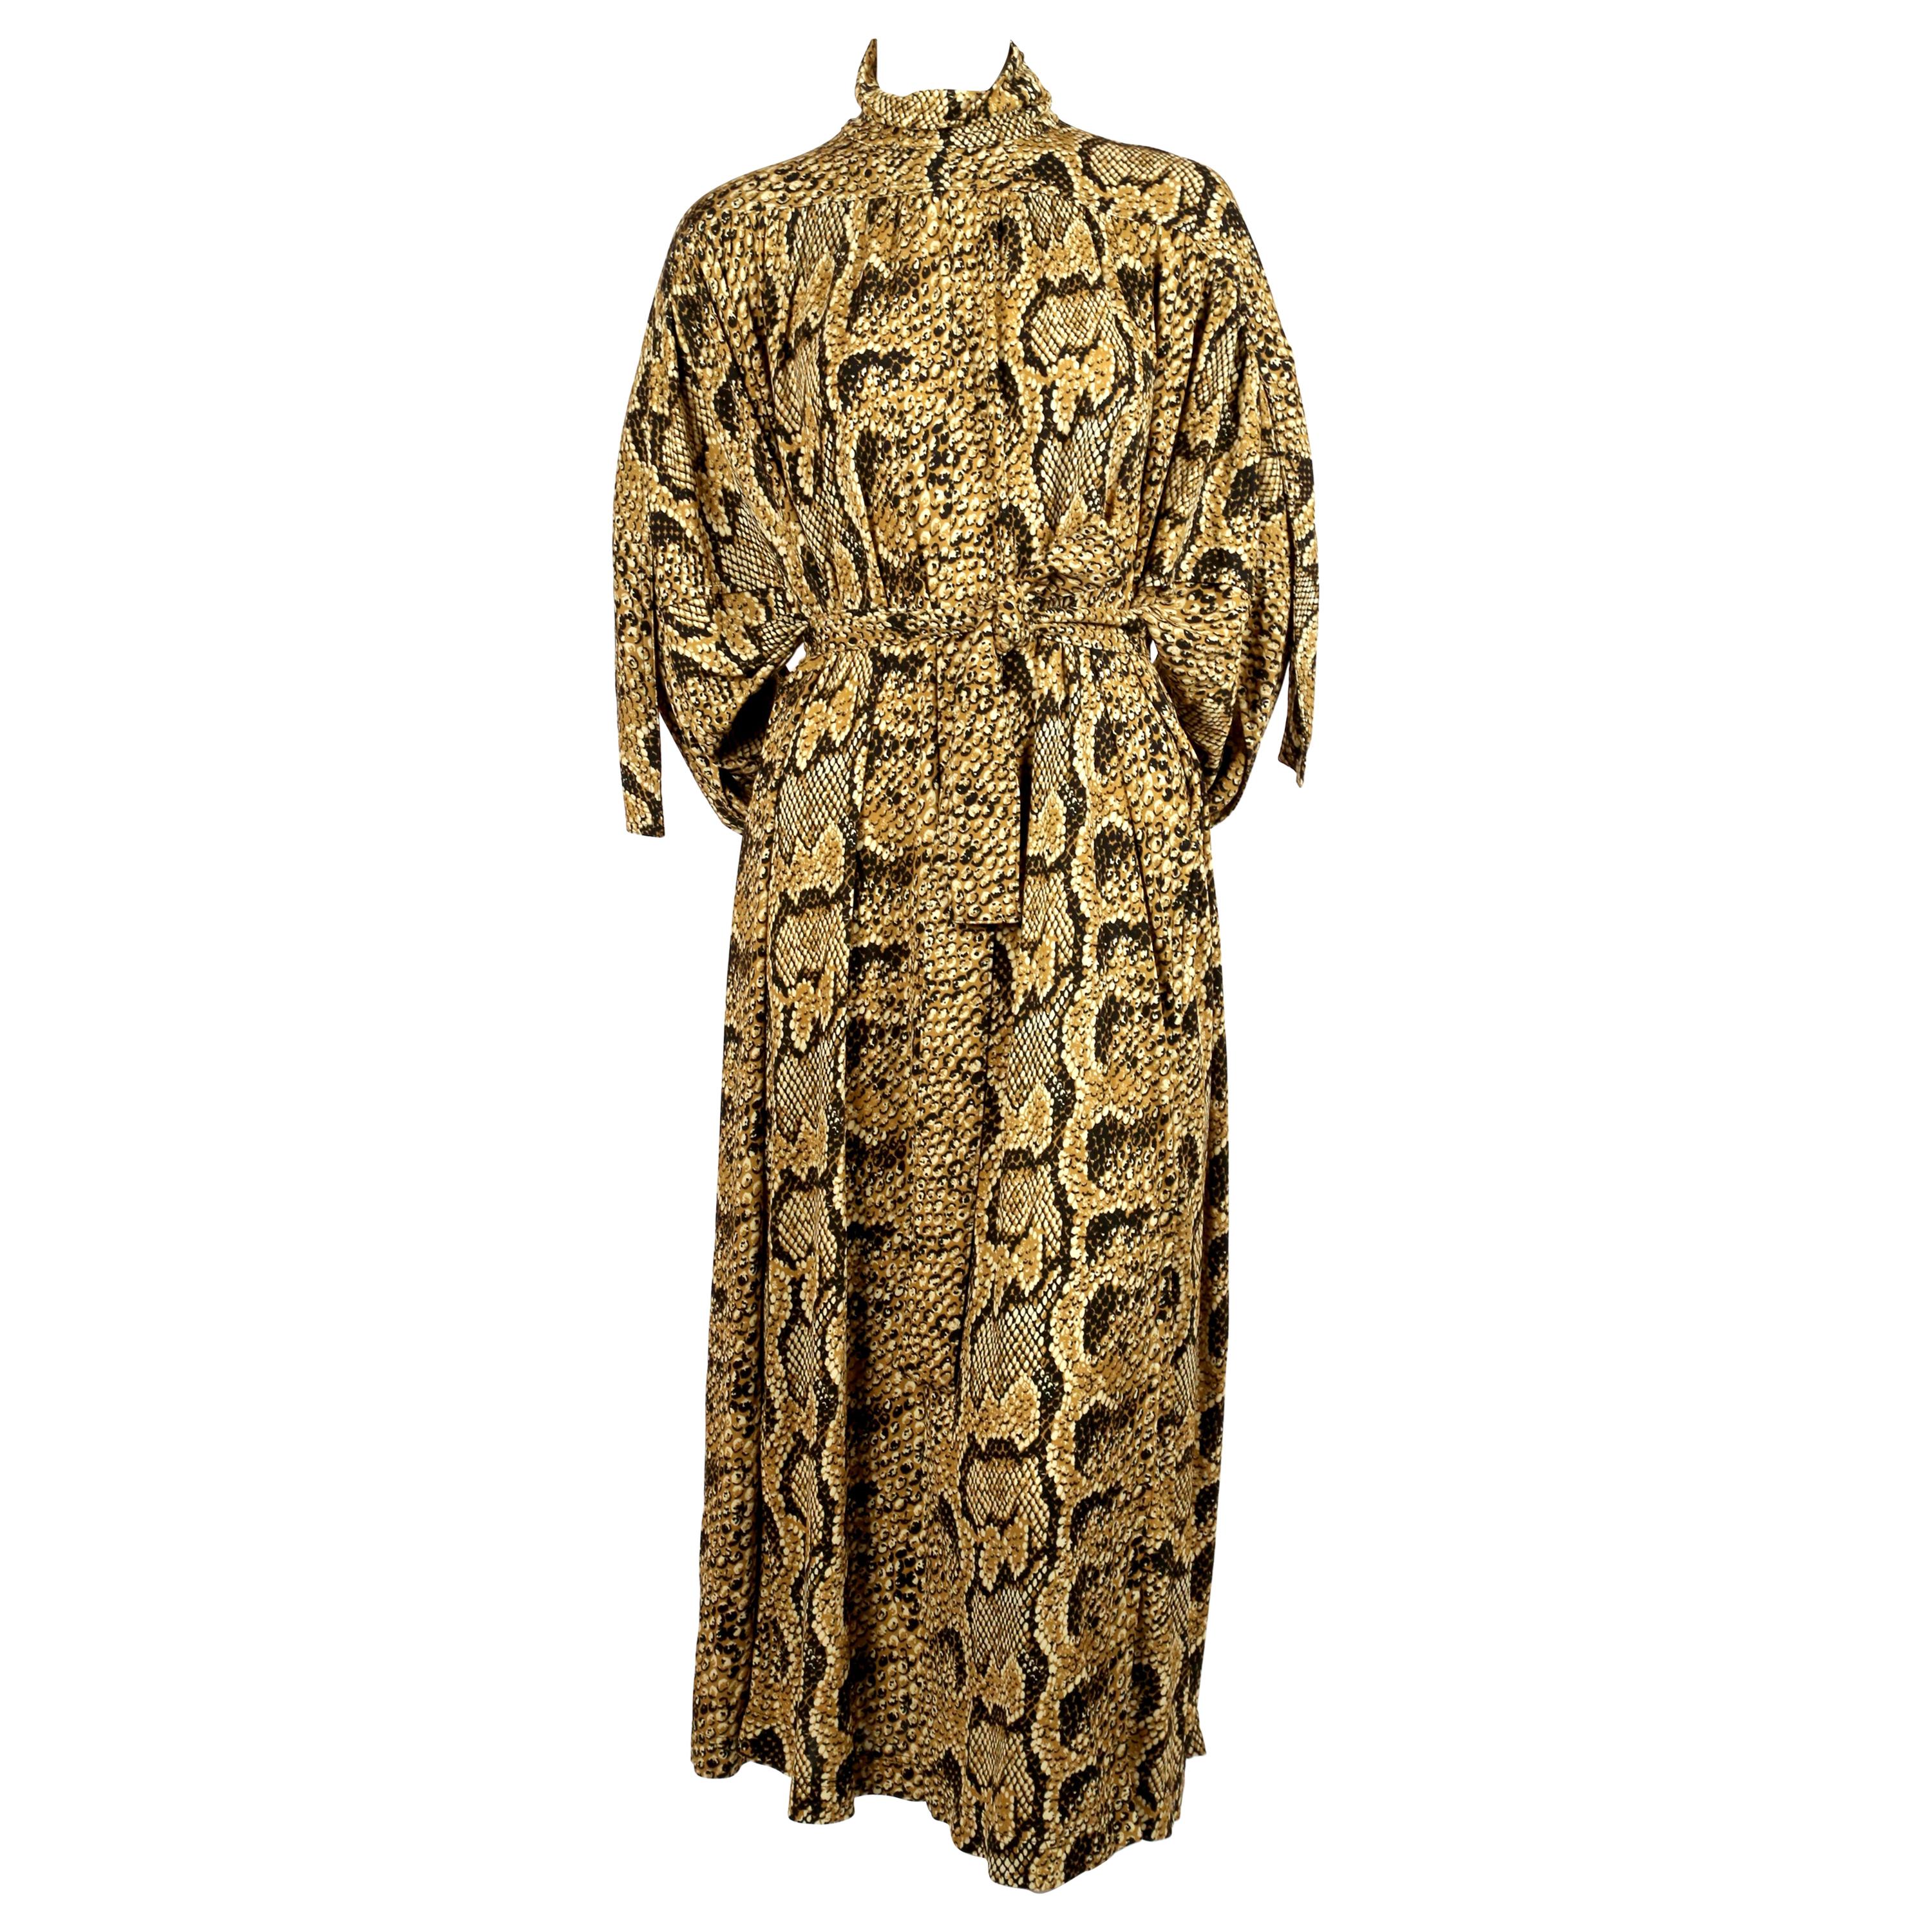 2018 CELINE by PHOEBE PHILO reptile printed oversized dress